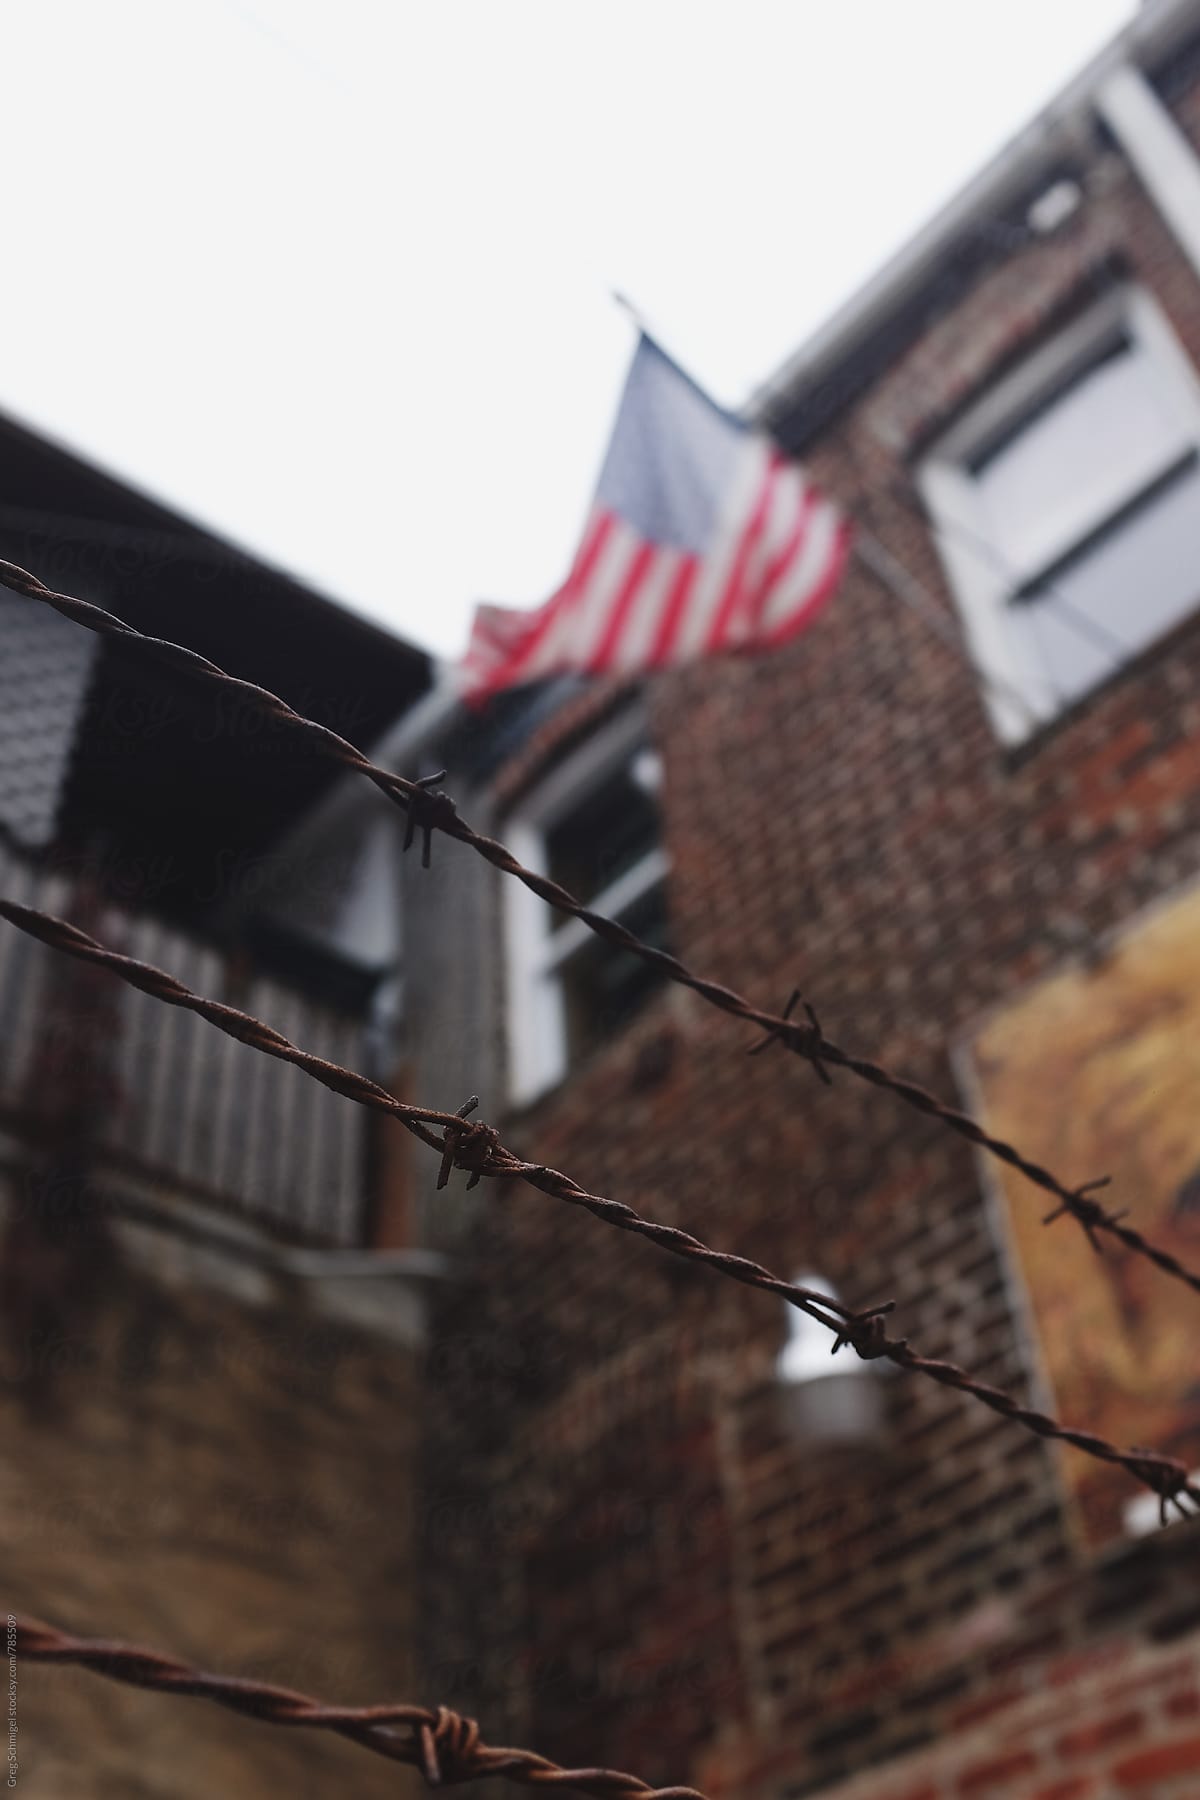 A barbed wire fence with an American flag waving in the background on a city building